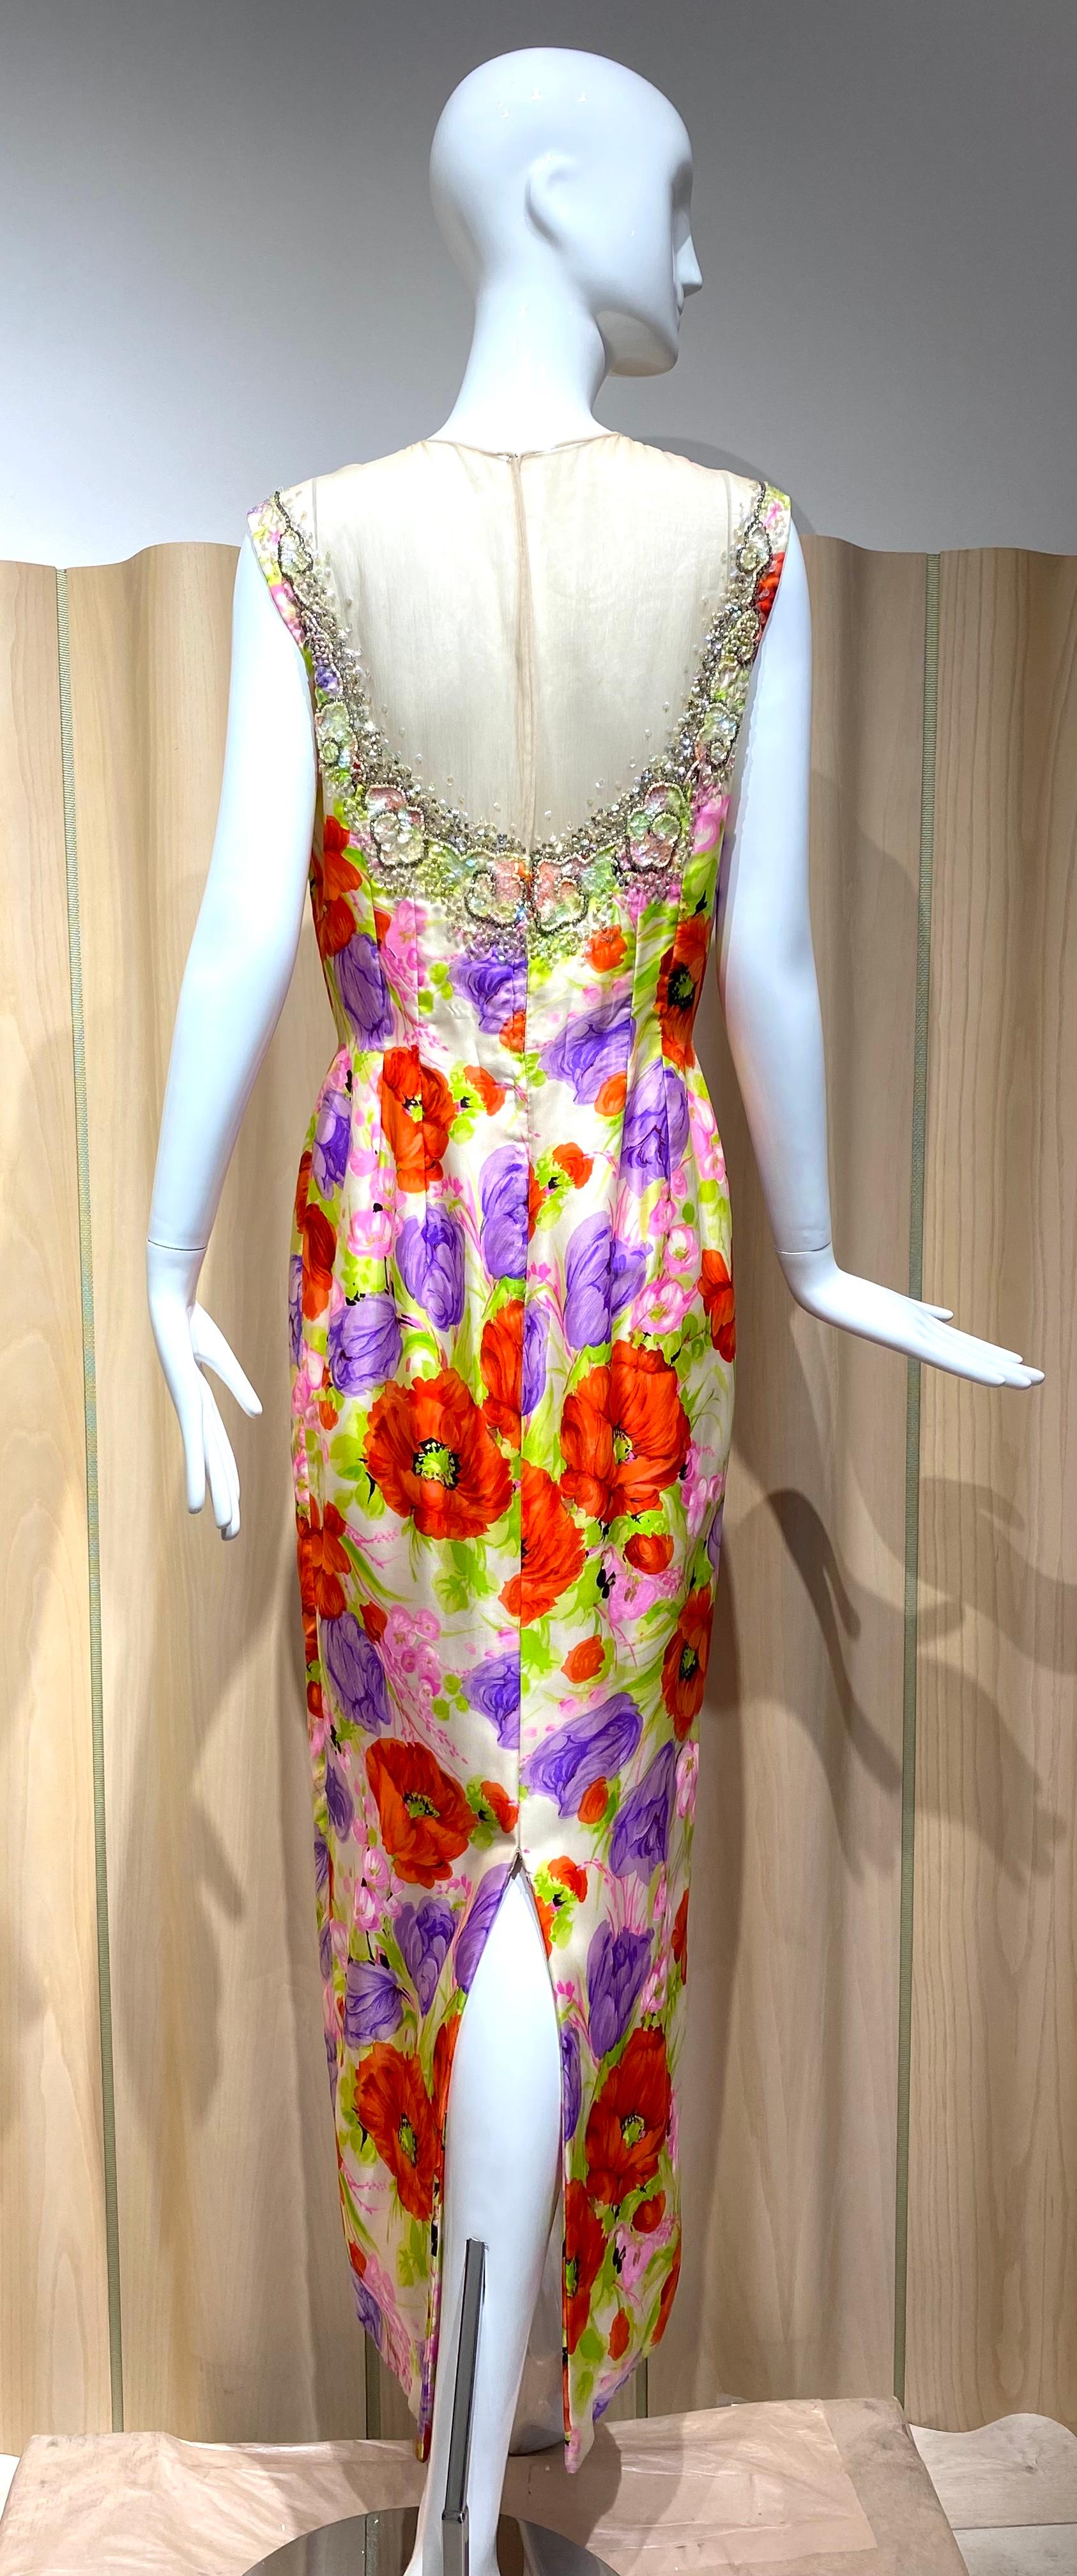 Women's 1960s Mr. Blackwell Multi Color Floral Print Silk Sheath Cocktail Dress For Sale